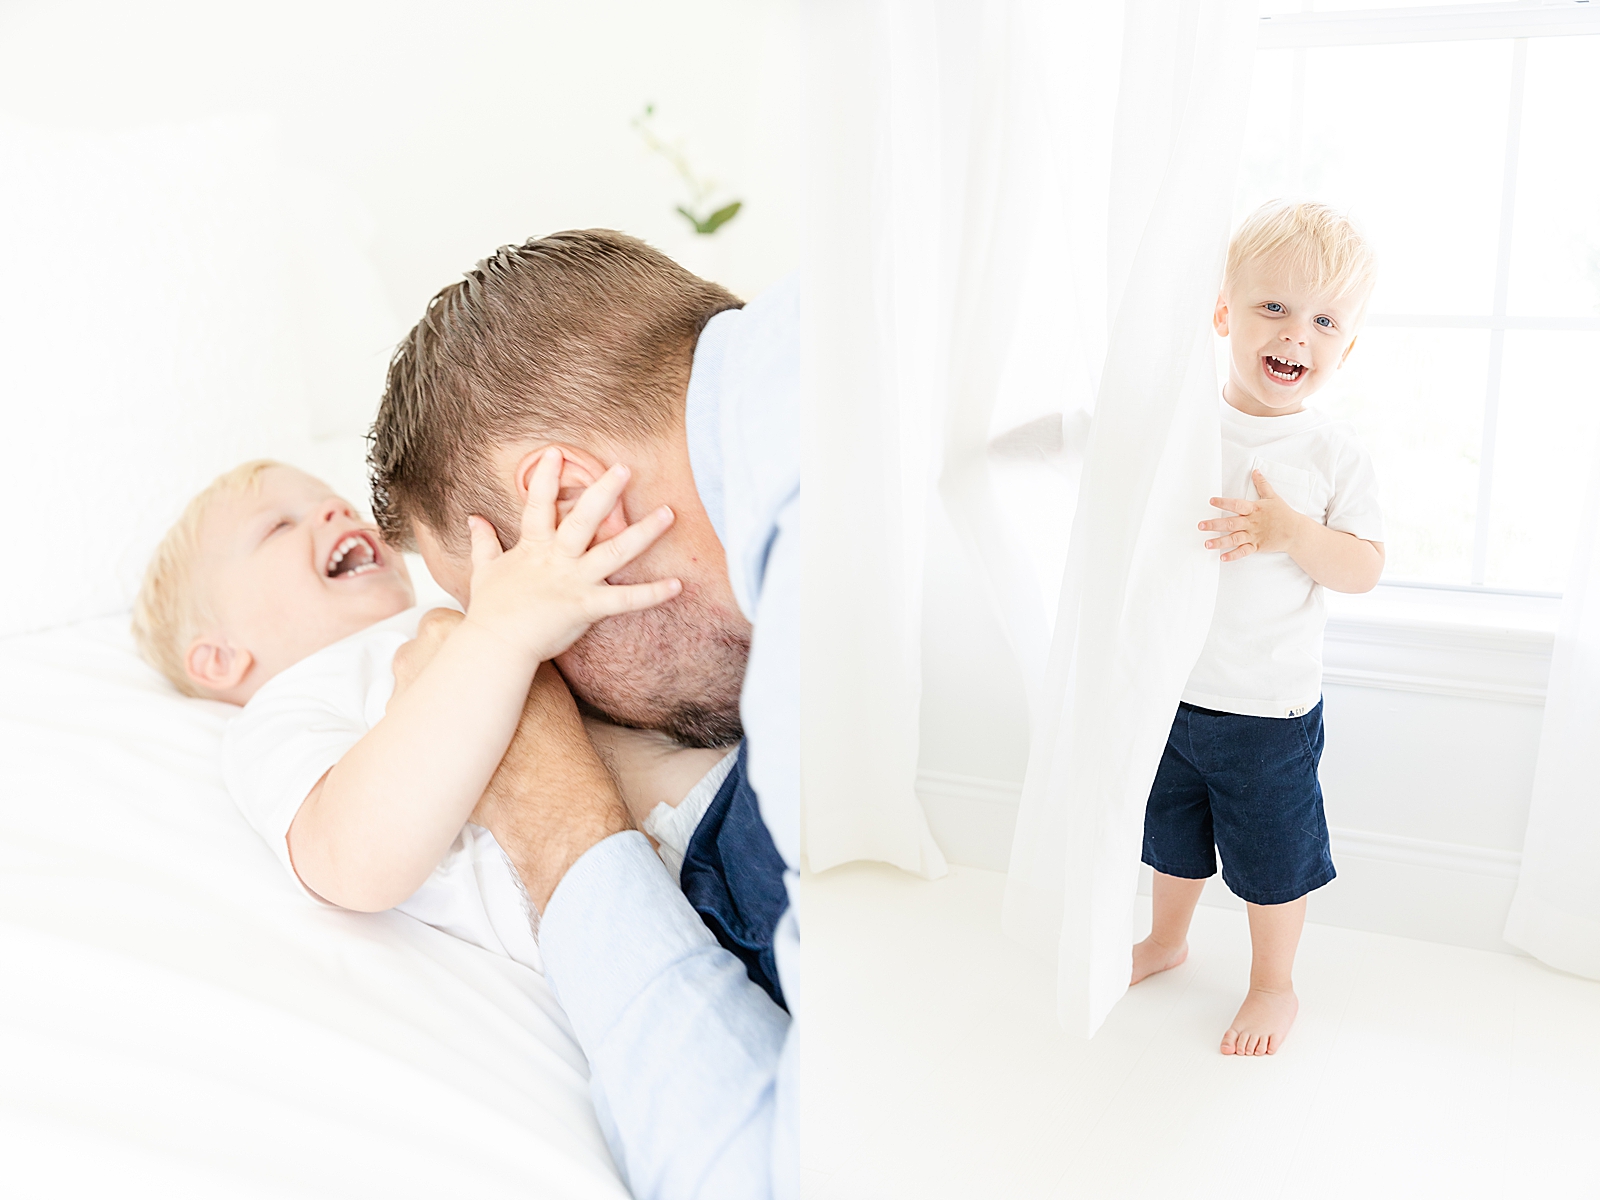 dad blowing a raspberry on toddler toys tummy while he laughs and toddler hiding behind white curtains smiling